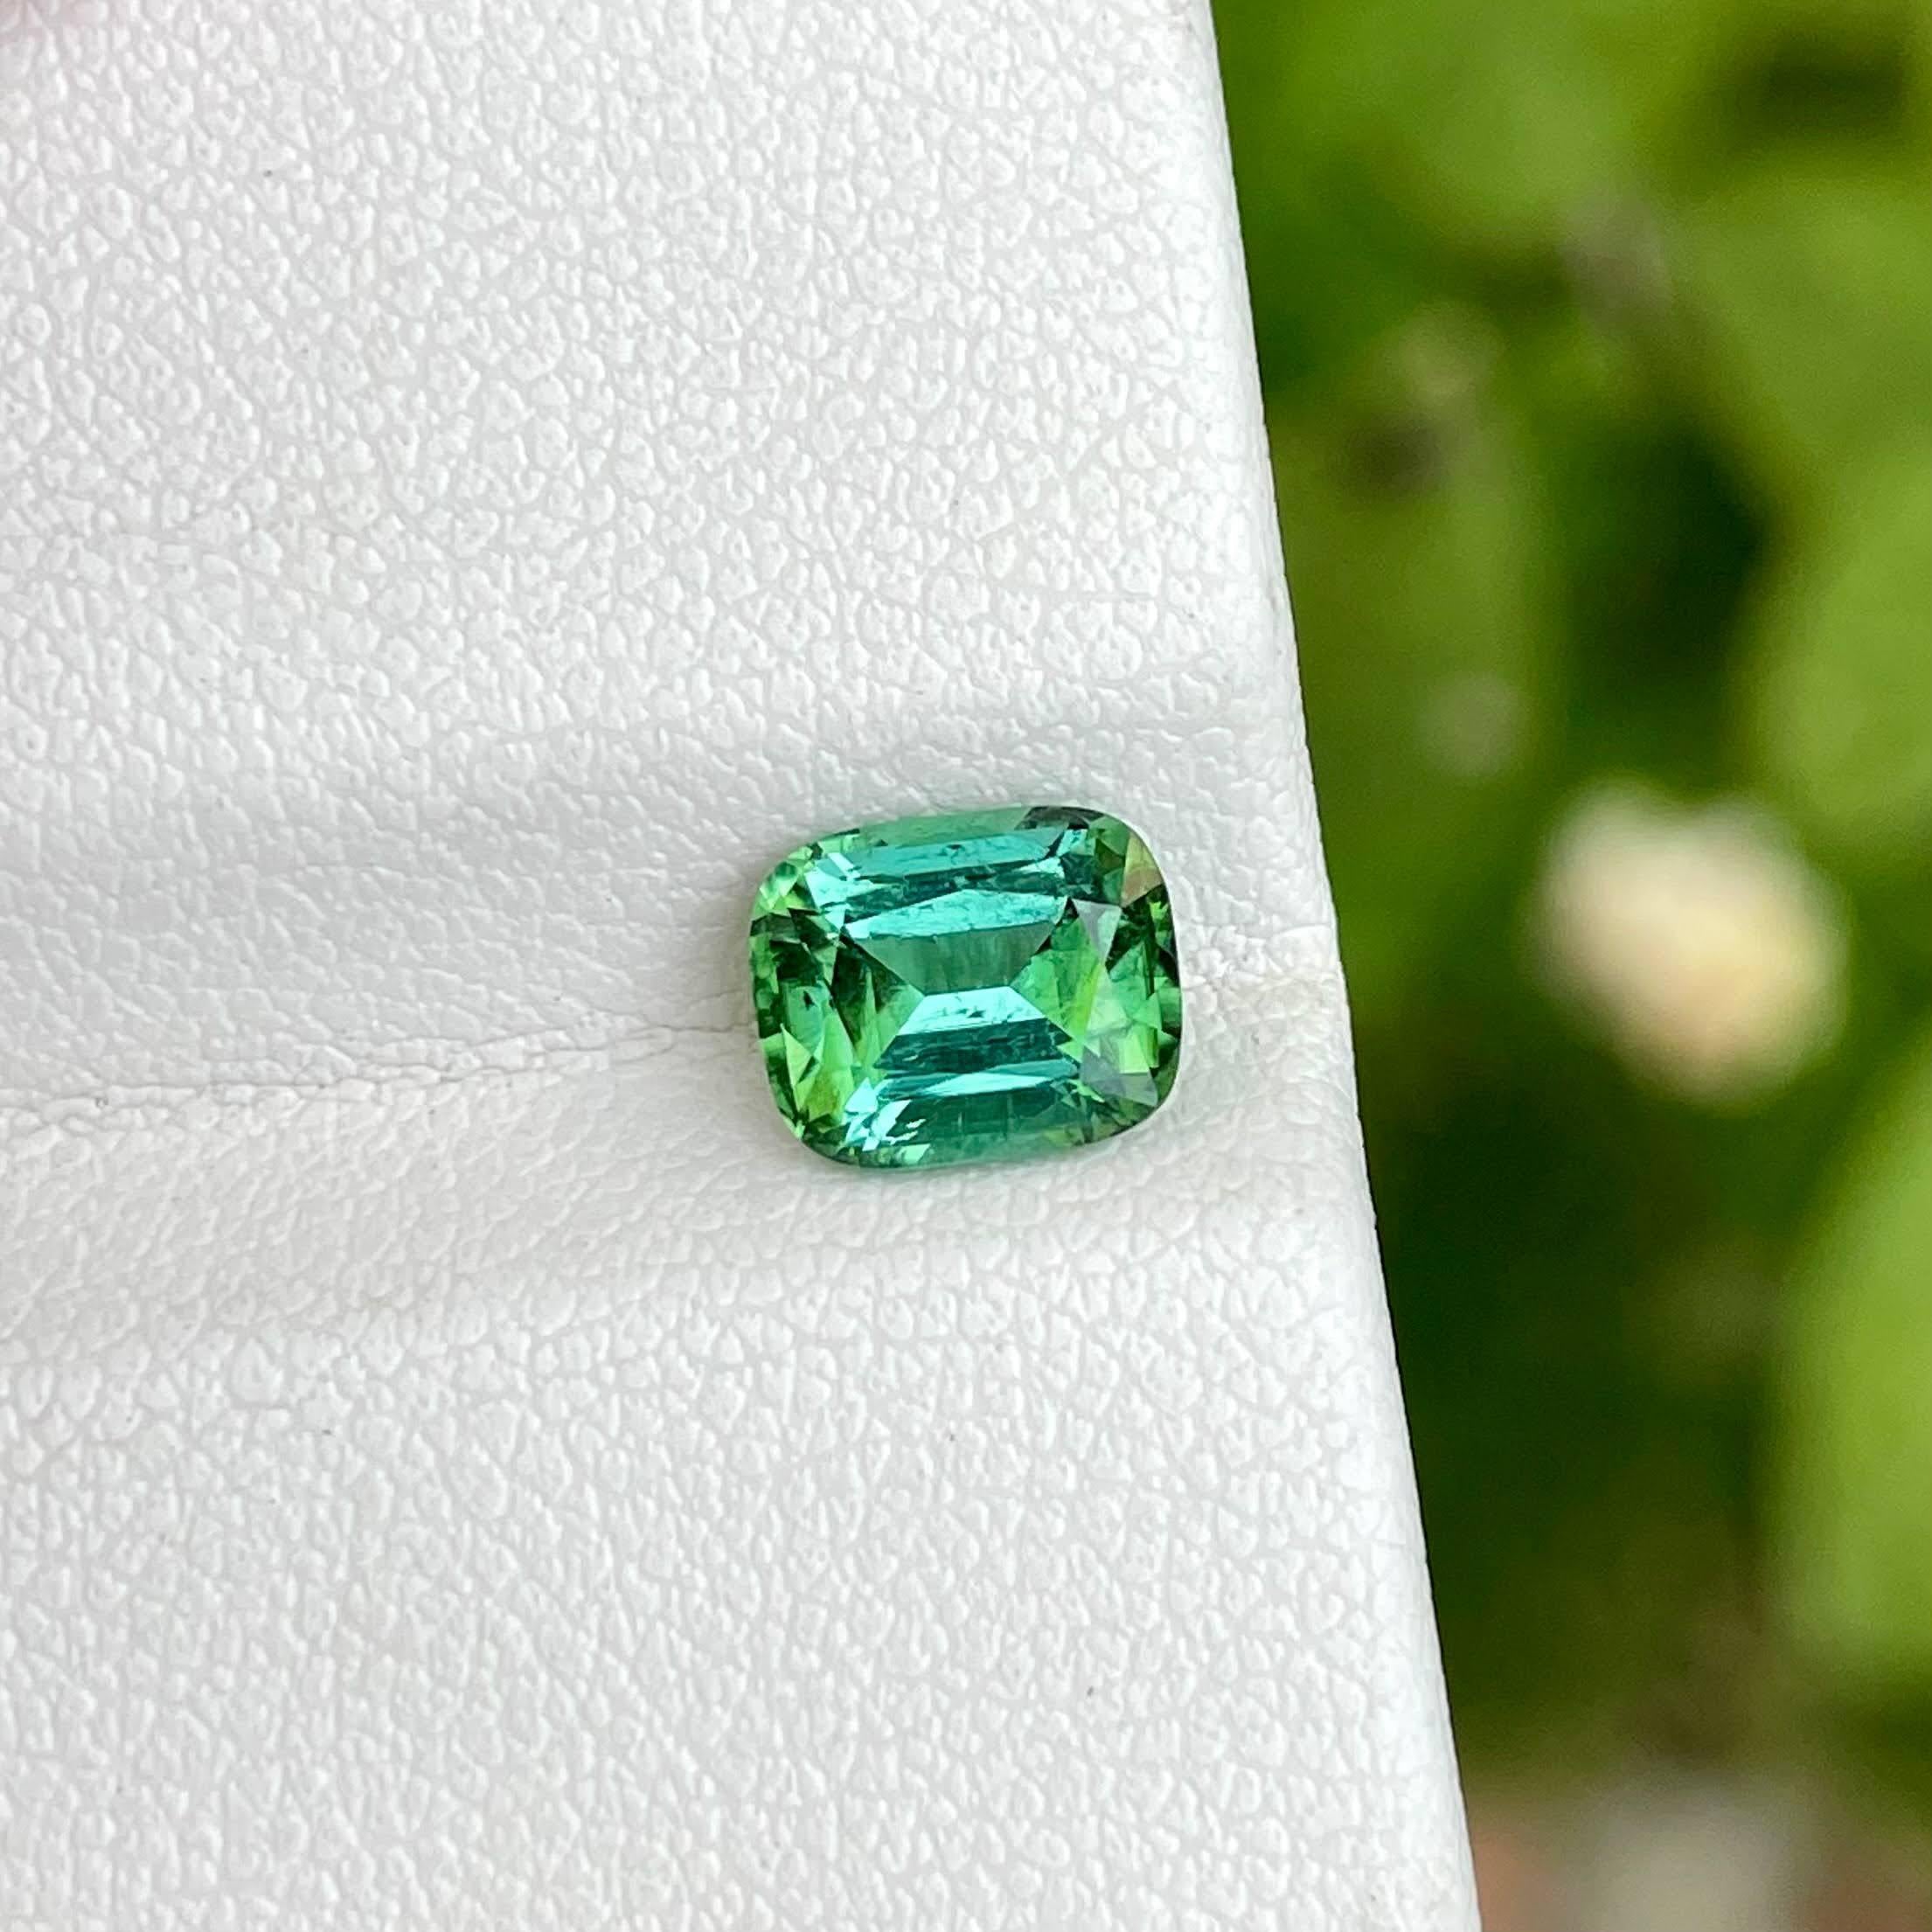 Weight 1.45 carats 
Dimensions 7.4x6.1x4.4 mm
Treatment none 
Origin Afghanistan 
Clarity SI
Shape cushion 
Cut fancy cushion



The 1.45 carat Mint Green Tourmaline stone, meticulously cut into a cushion shape, is a striking example of Afghan